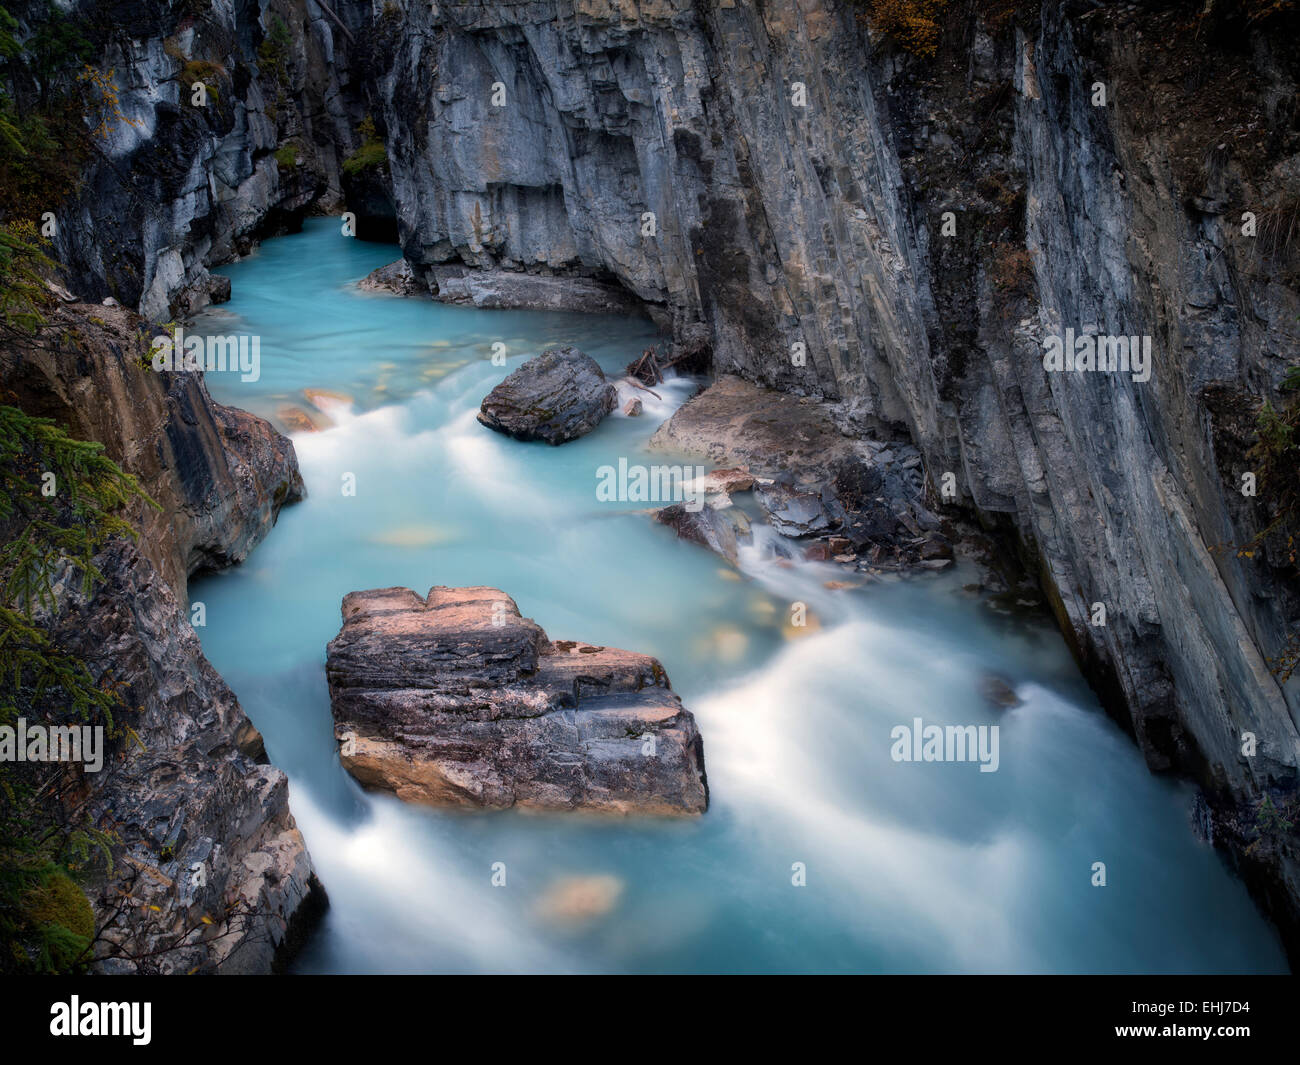 Ruisseau Tokumm, Marble Canyon. Kooteny National Park, Canada Banque D'Images